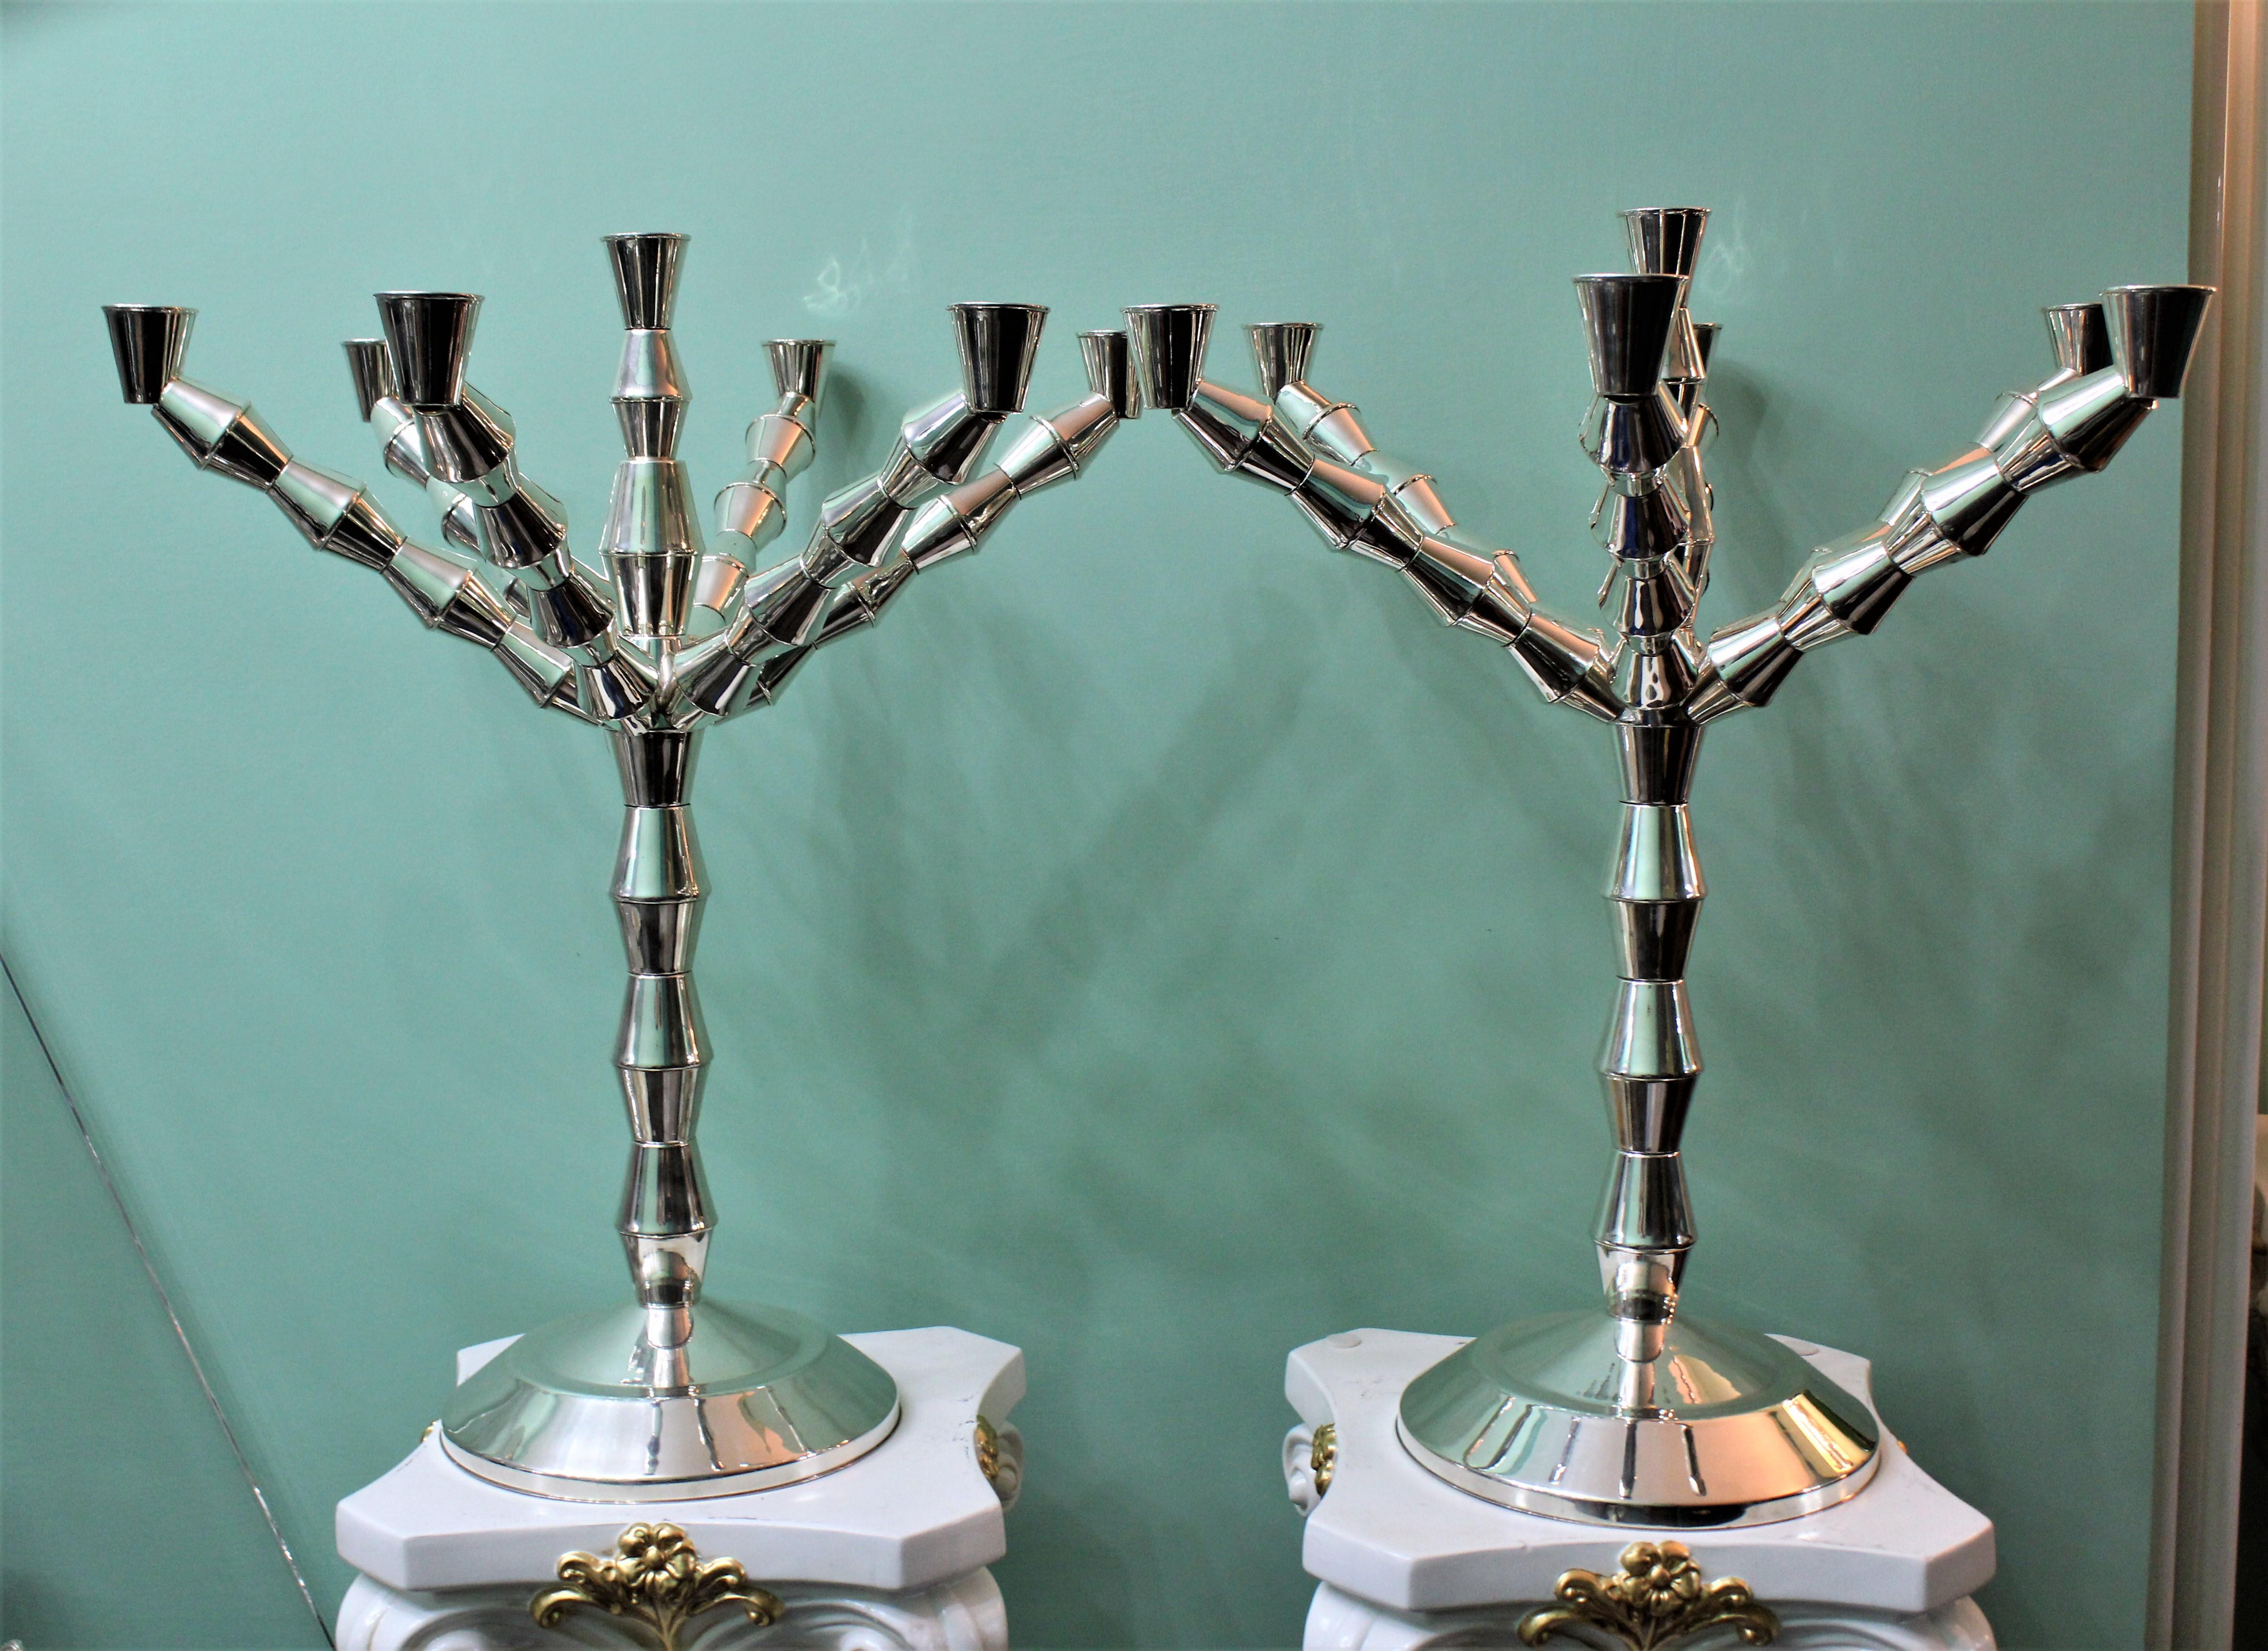 Hand-Crafted 20th Century Art Deco Italian Silver Candelabras Pair by Carlo Trebbi, 1930s For Sale